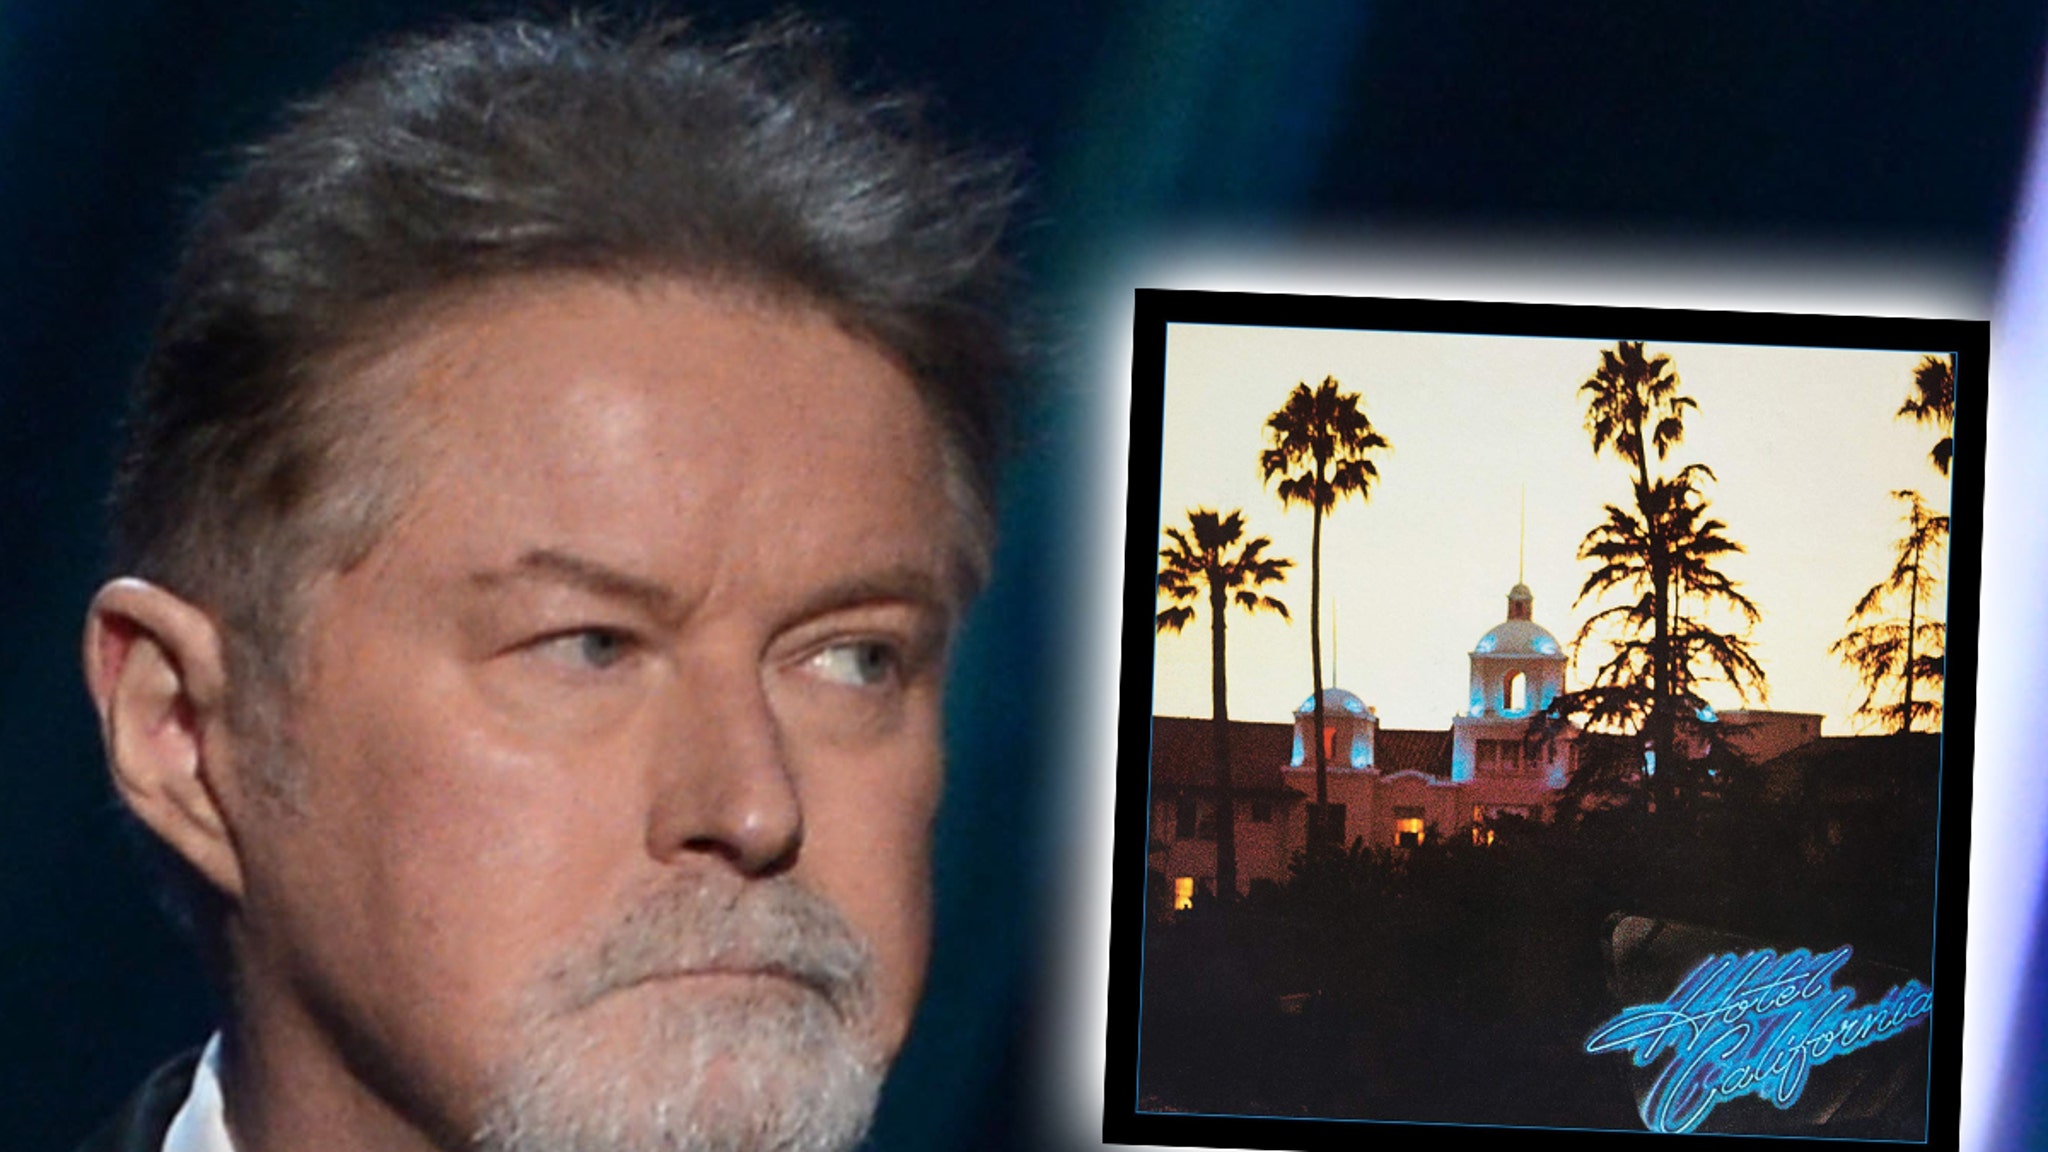 Eagles Handwritten Lyrics For ‘Hotel California’ Allegedly Stolen, Males Indicted